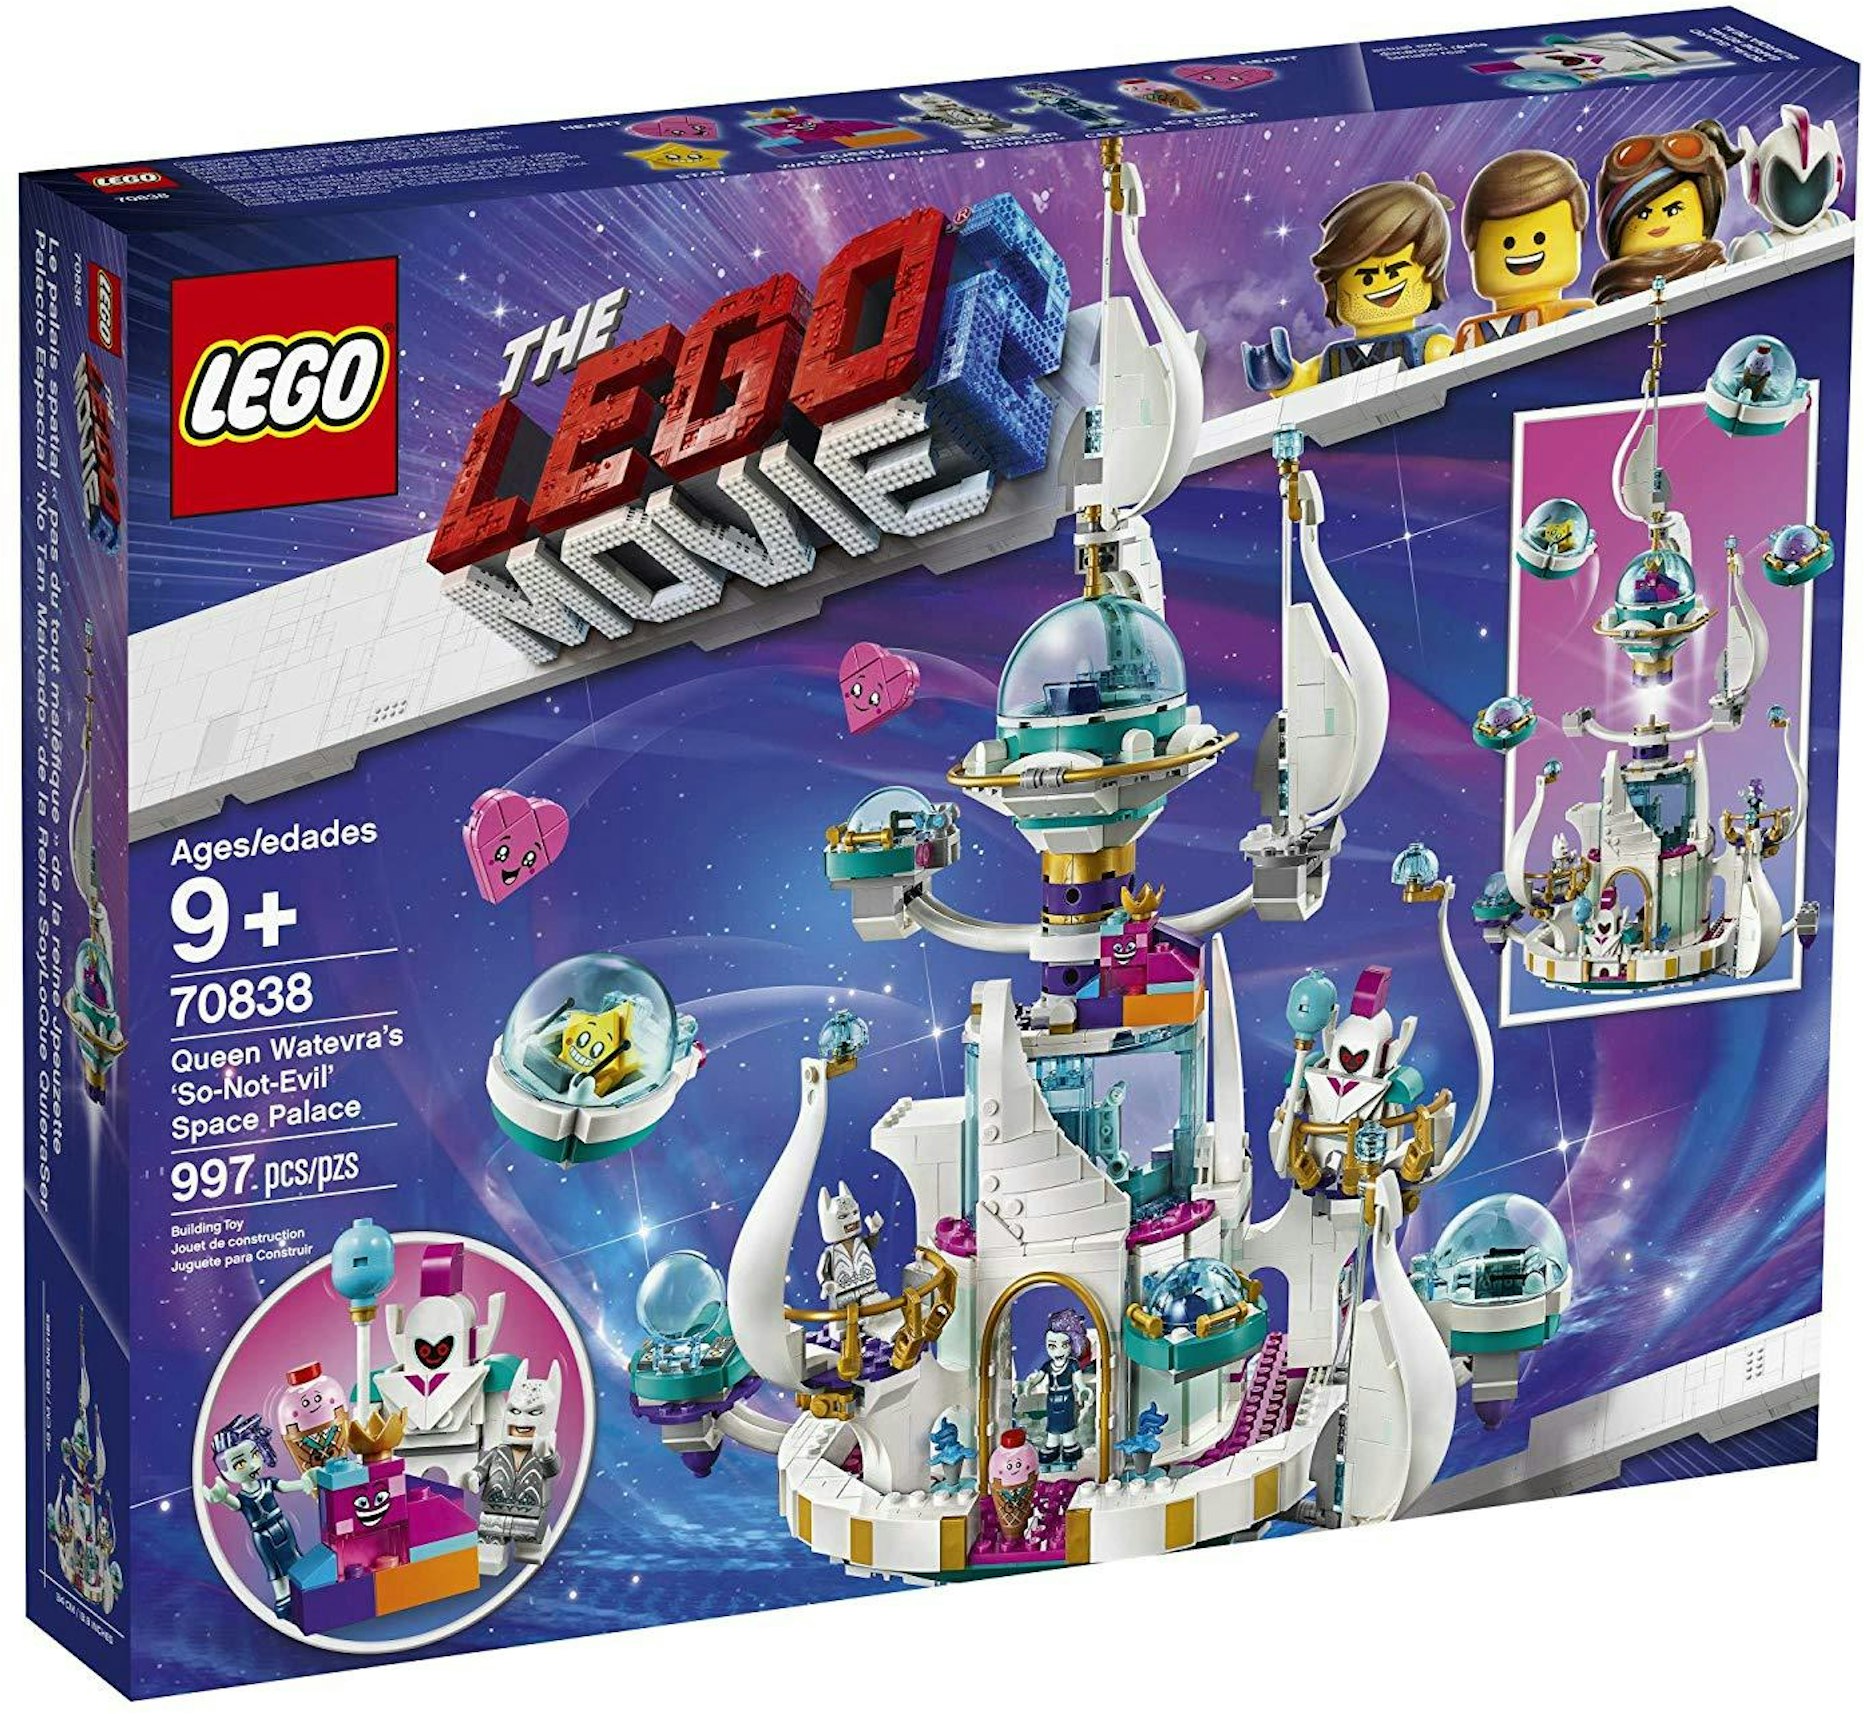 LEGO The LEGO Movie 2 Queens Watevra's Space Palace Set 70838 - US